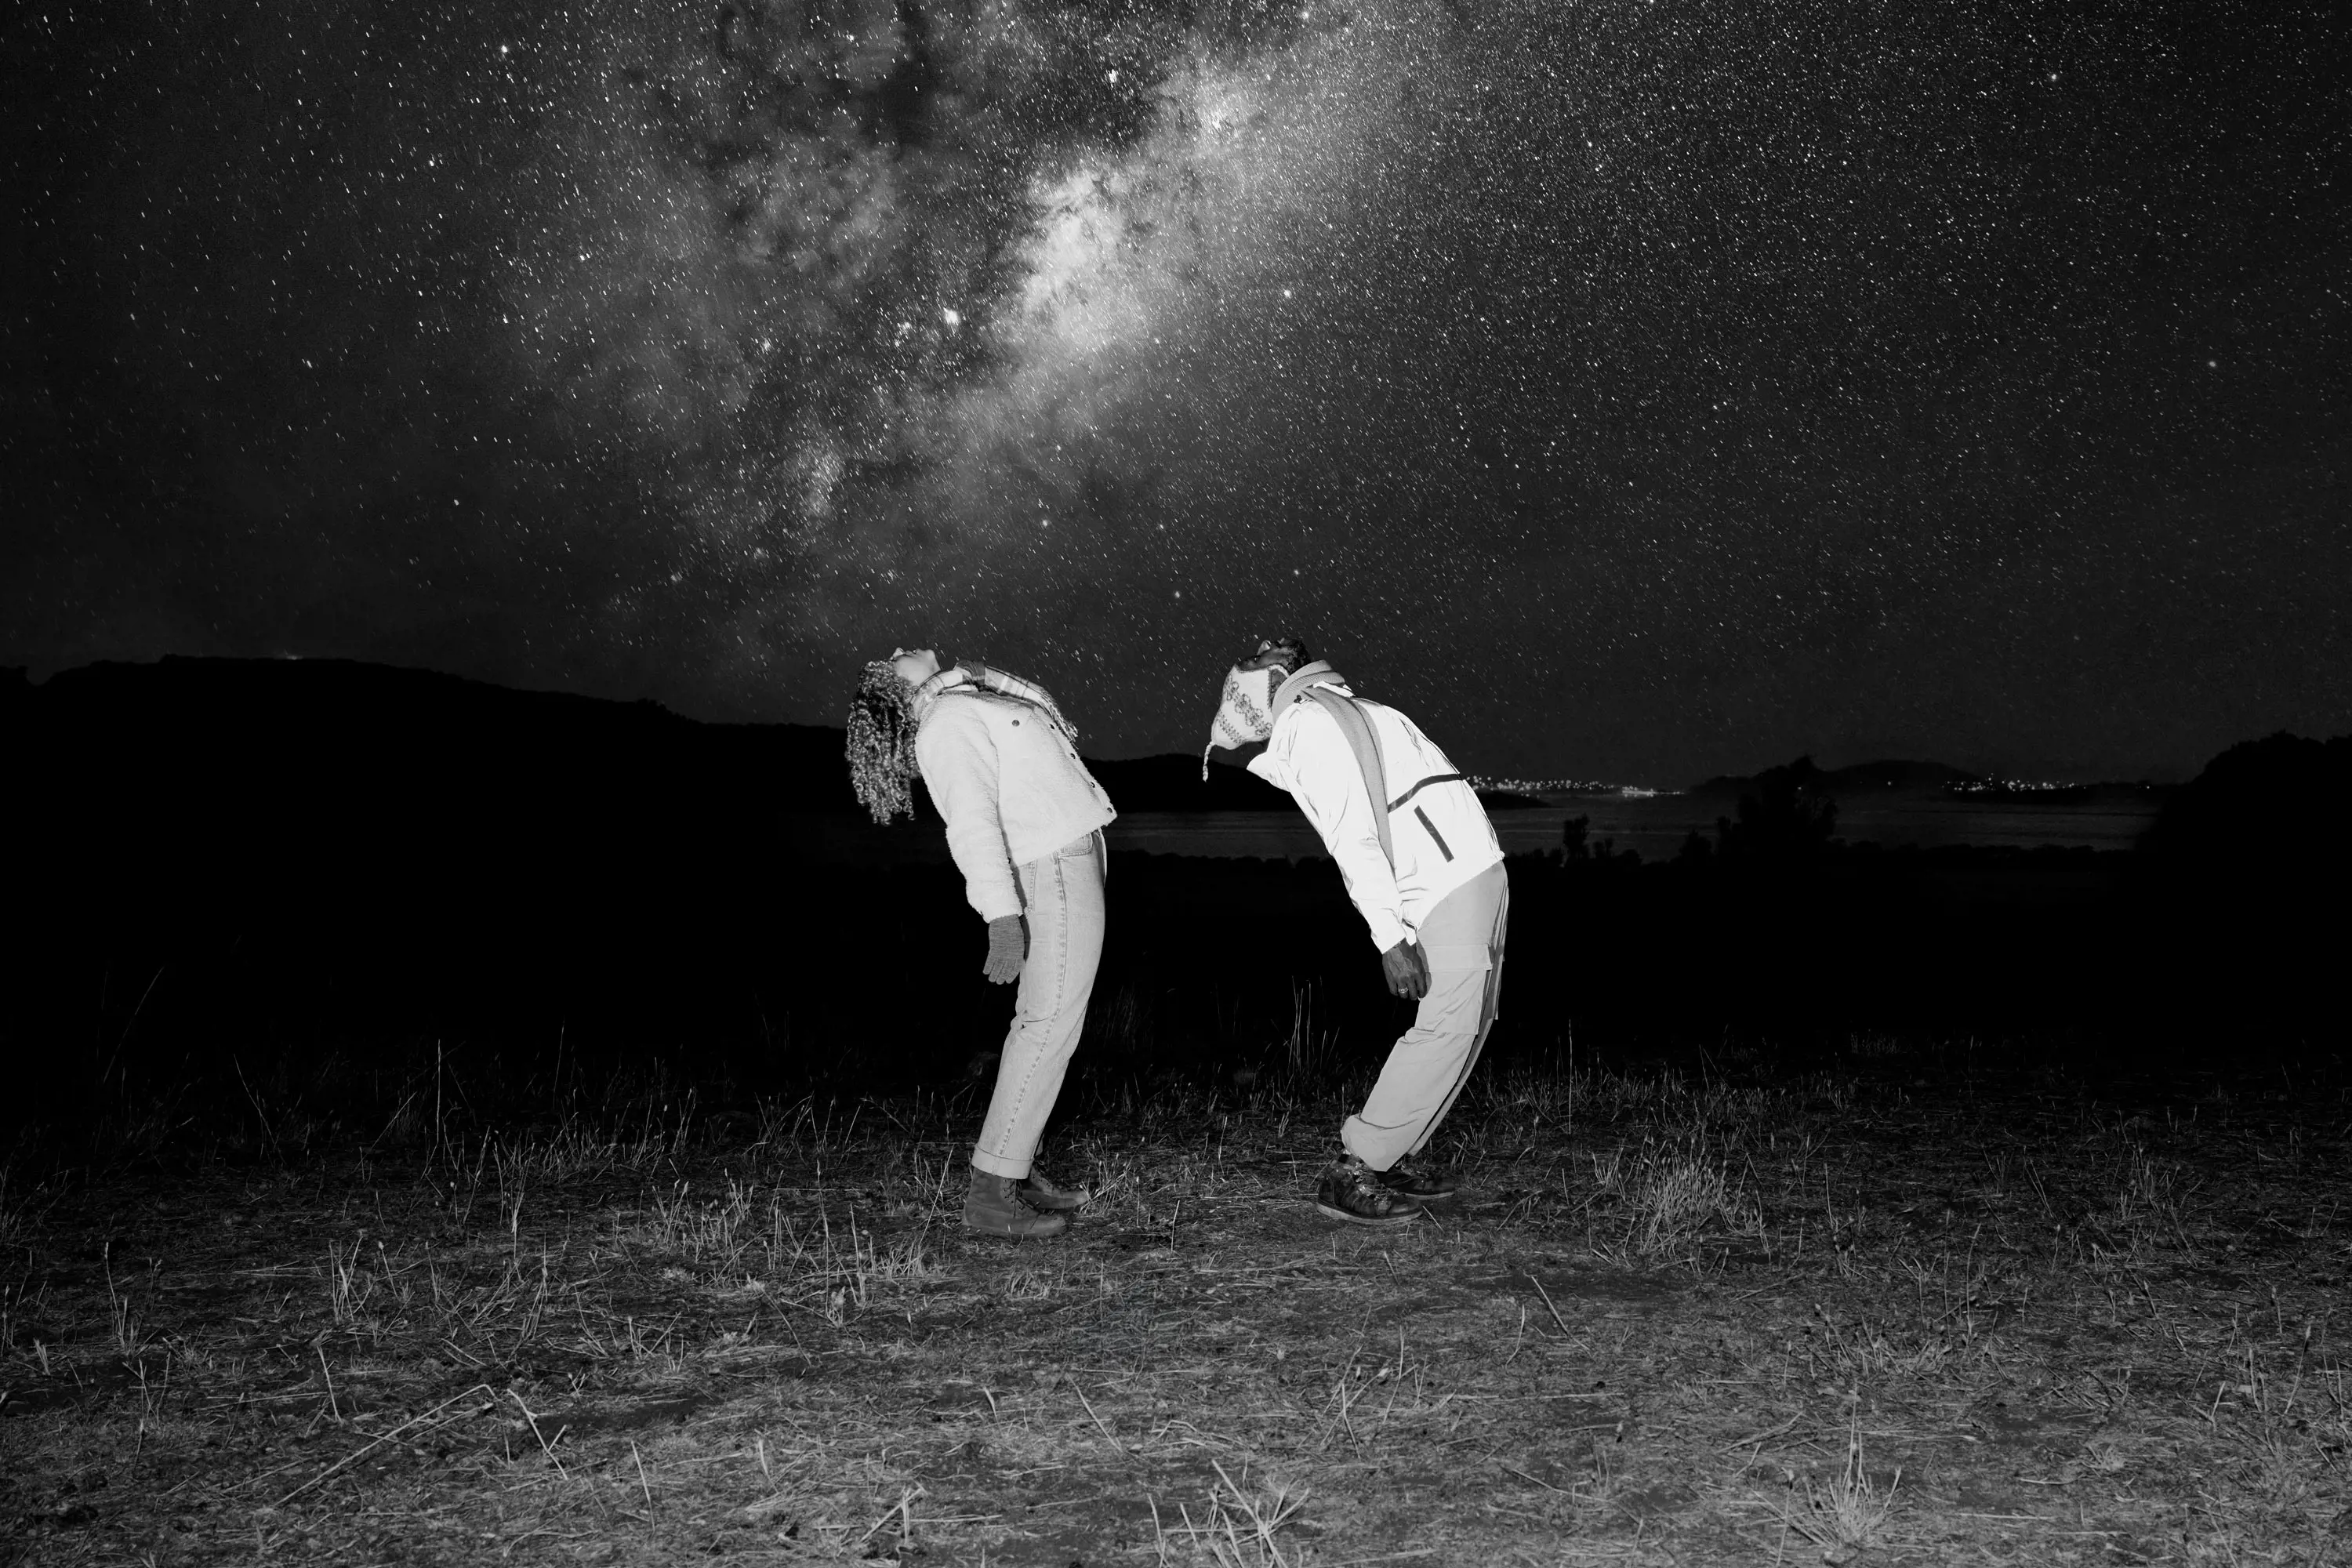 Two people arch their backs and look up into the night sky at the milky way.